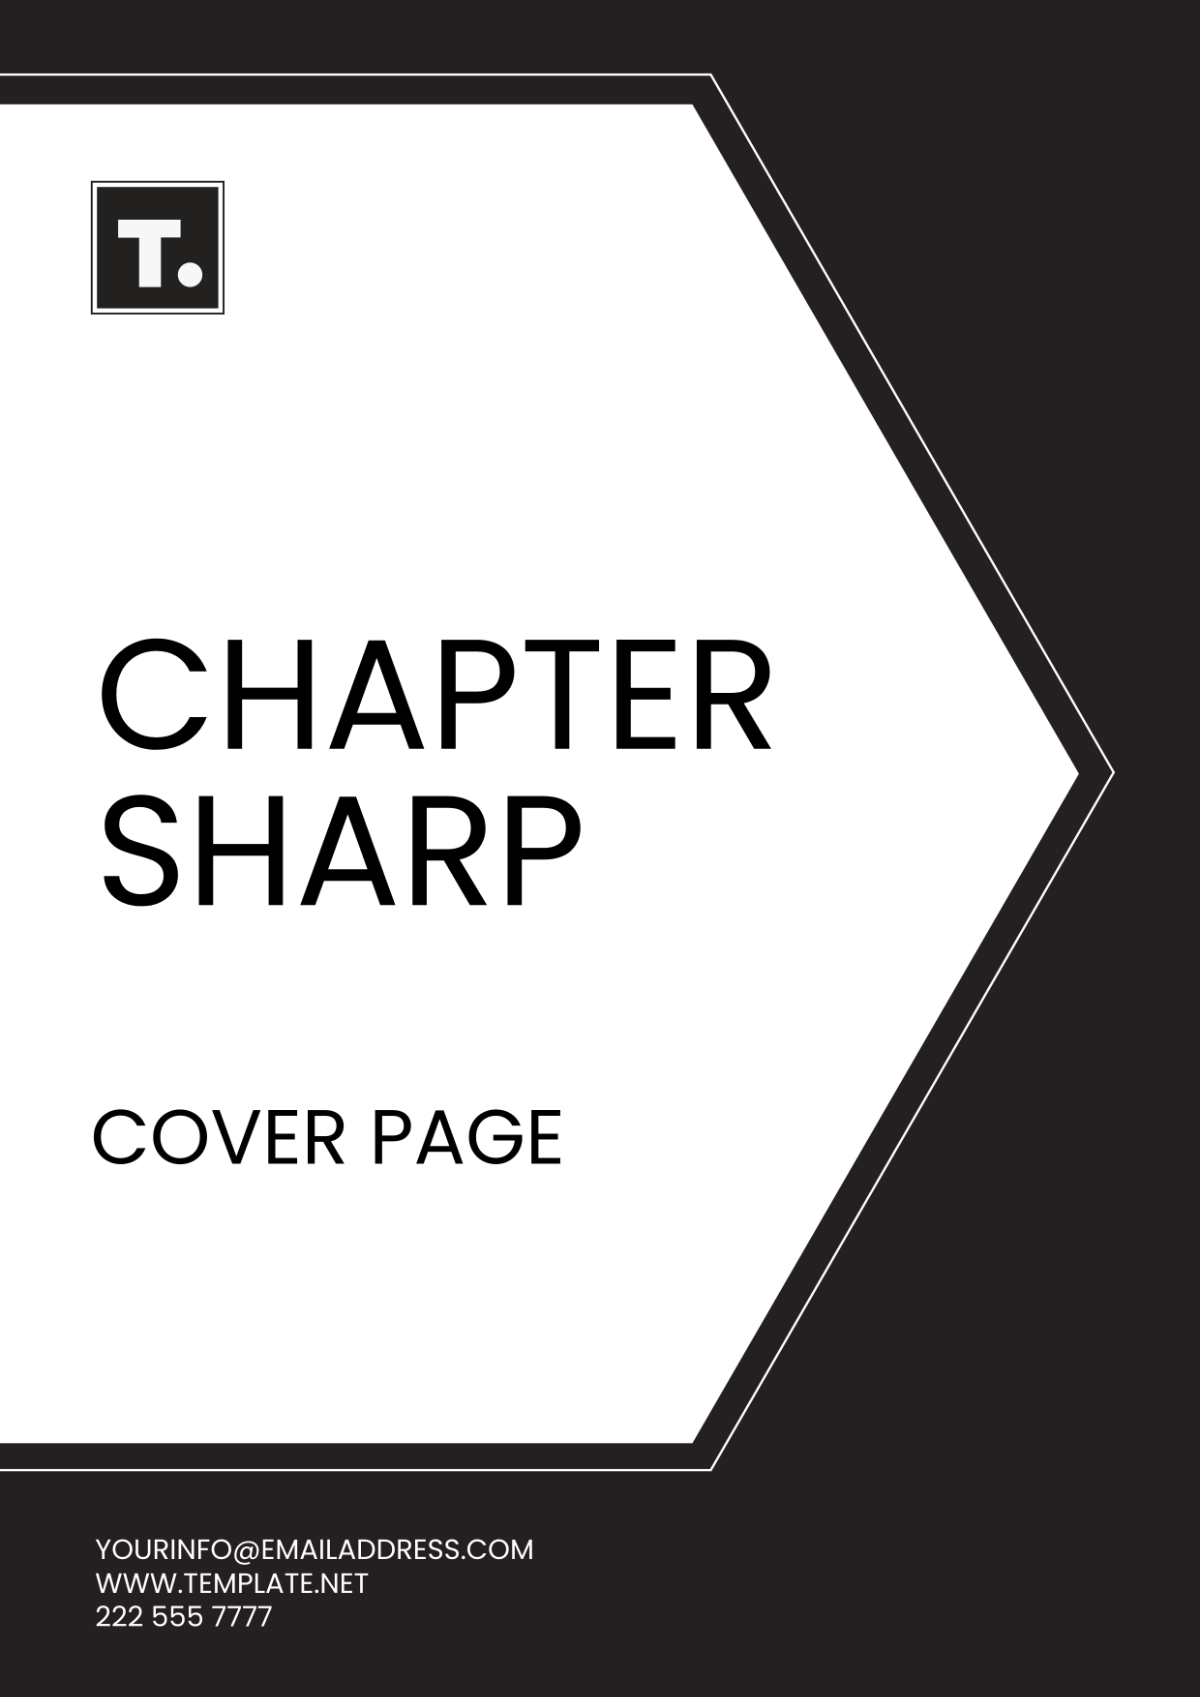 Free Chapter Sharp Cover Page Template